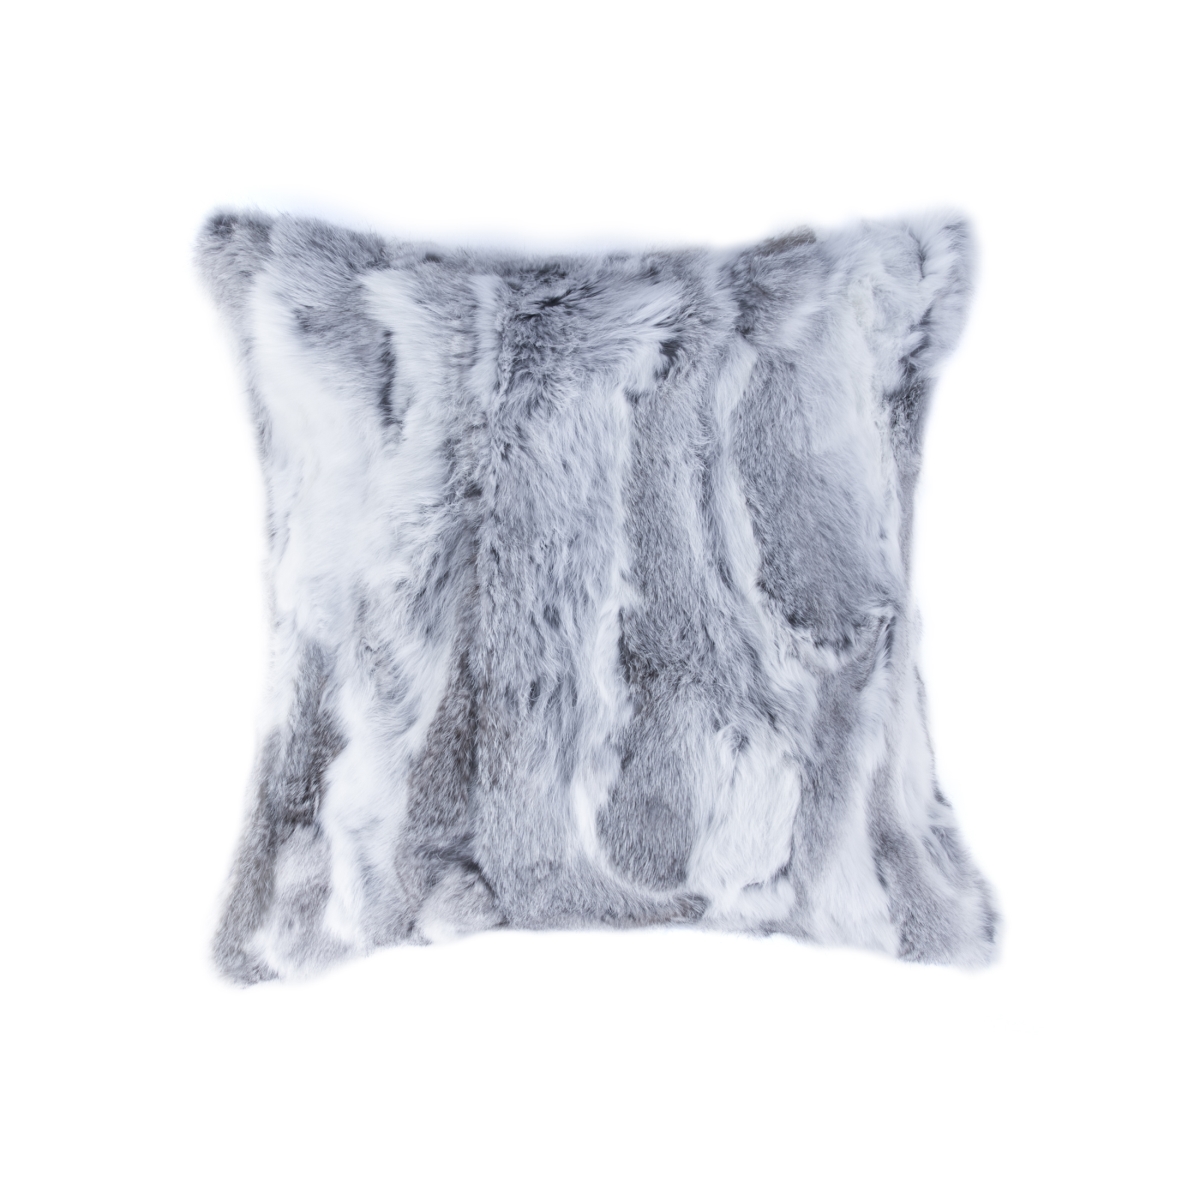 Picture of Natural 676685047052 18 x 18 in. Rabbit Fur Pillow - Grey